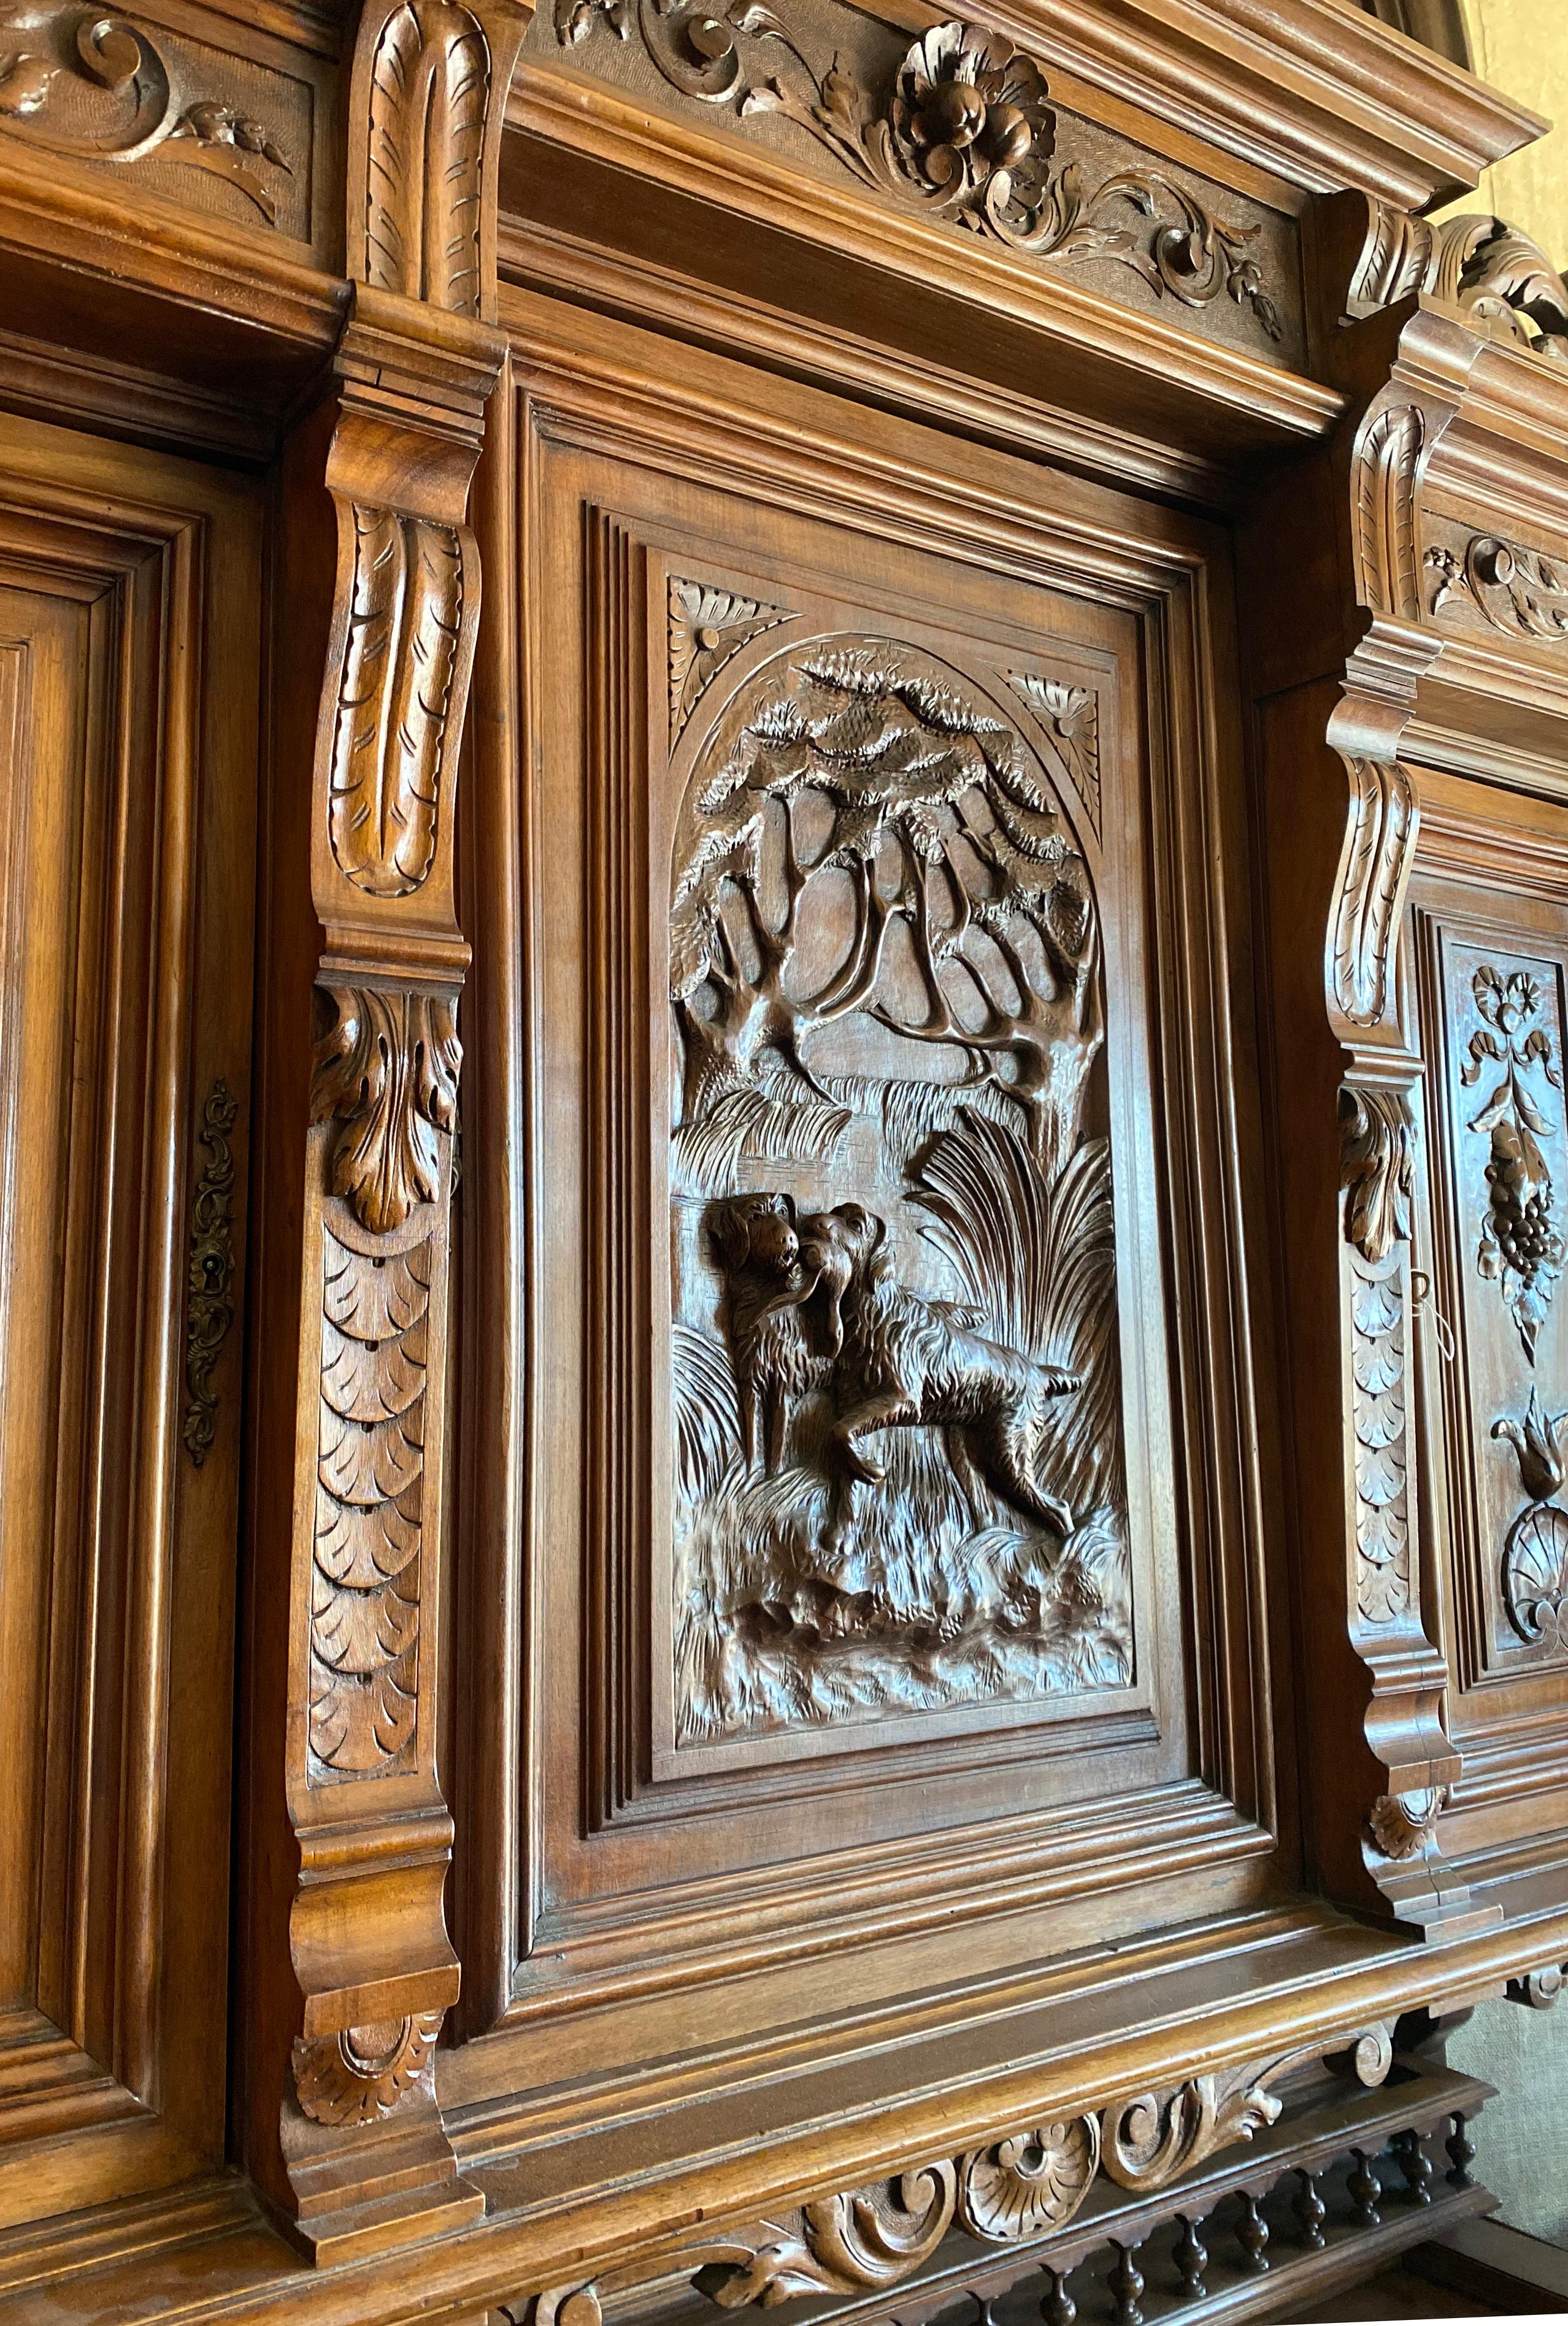 This intricately carved, beautiful wooden cabinet originates from France circa 1890. The center cabinet features a scene depicting a labrador carrying a catch of the day from hunting in the country.

Measurements: 68